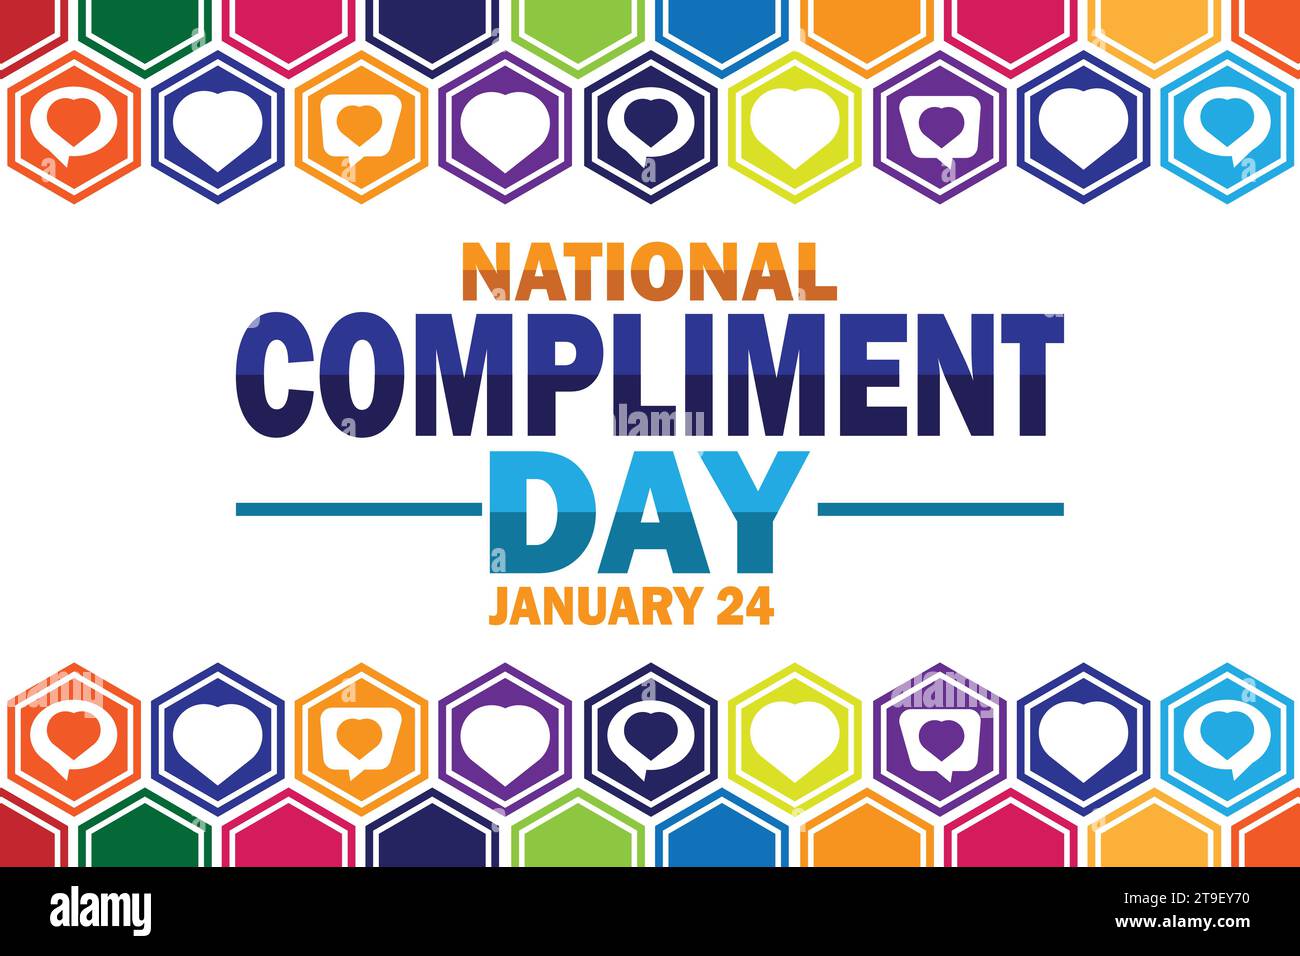 National Compliment Day Vector illustration. January 24. Holiday concept. Template for background, banner, card, poster with text inscription. Stock Vector